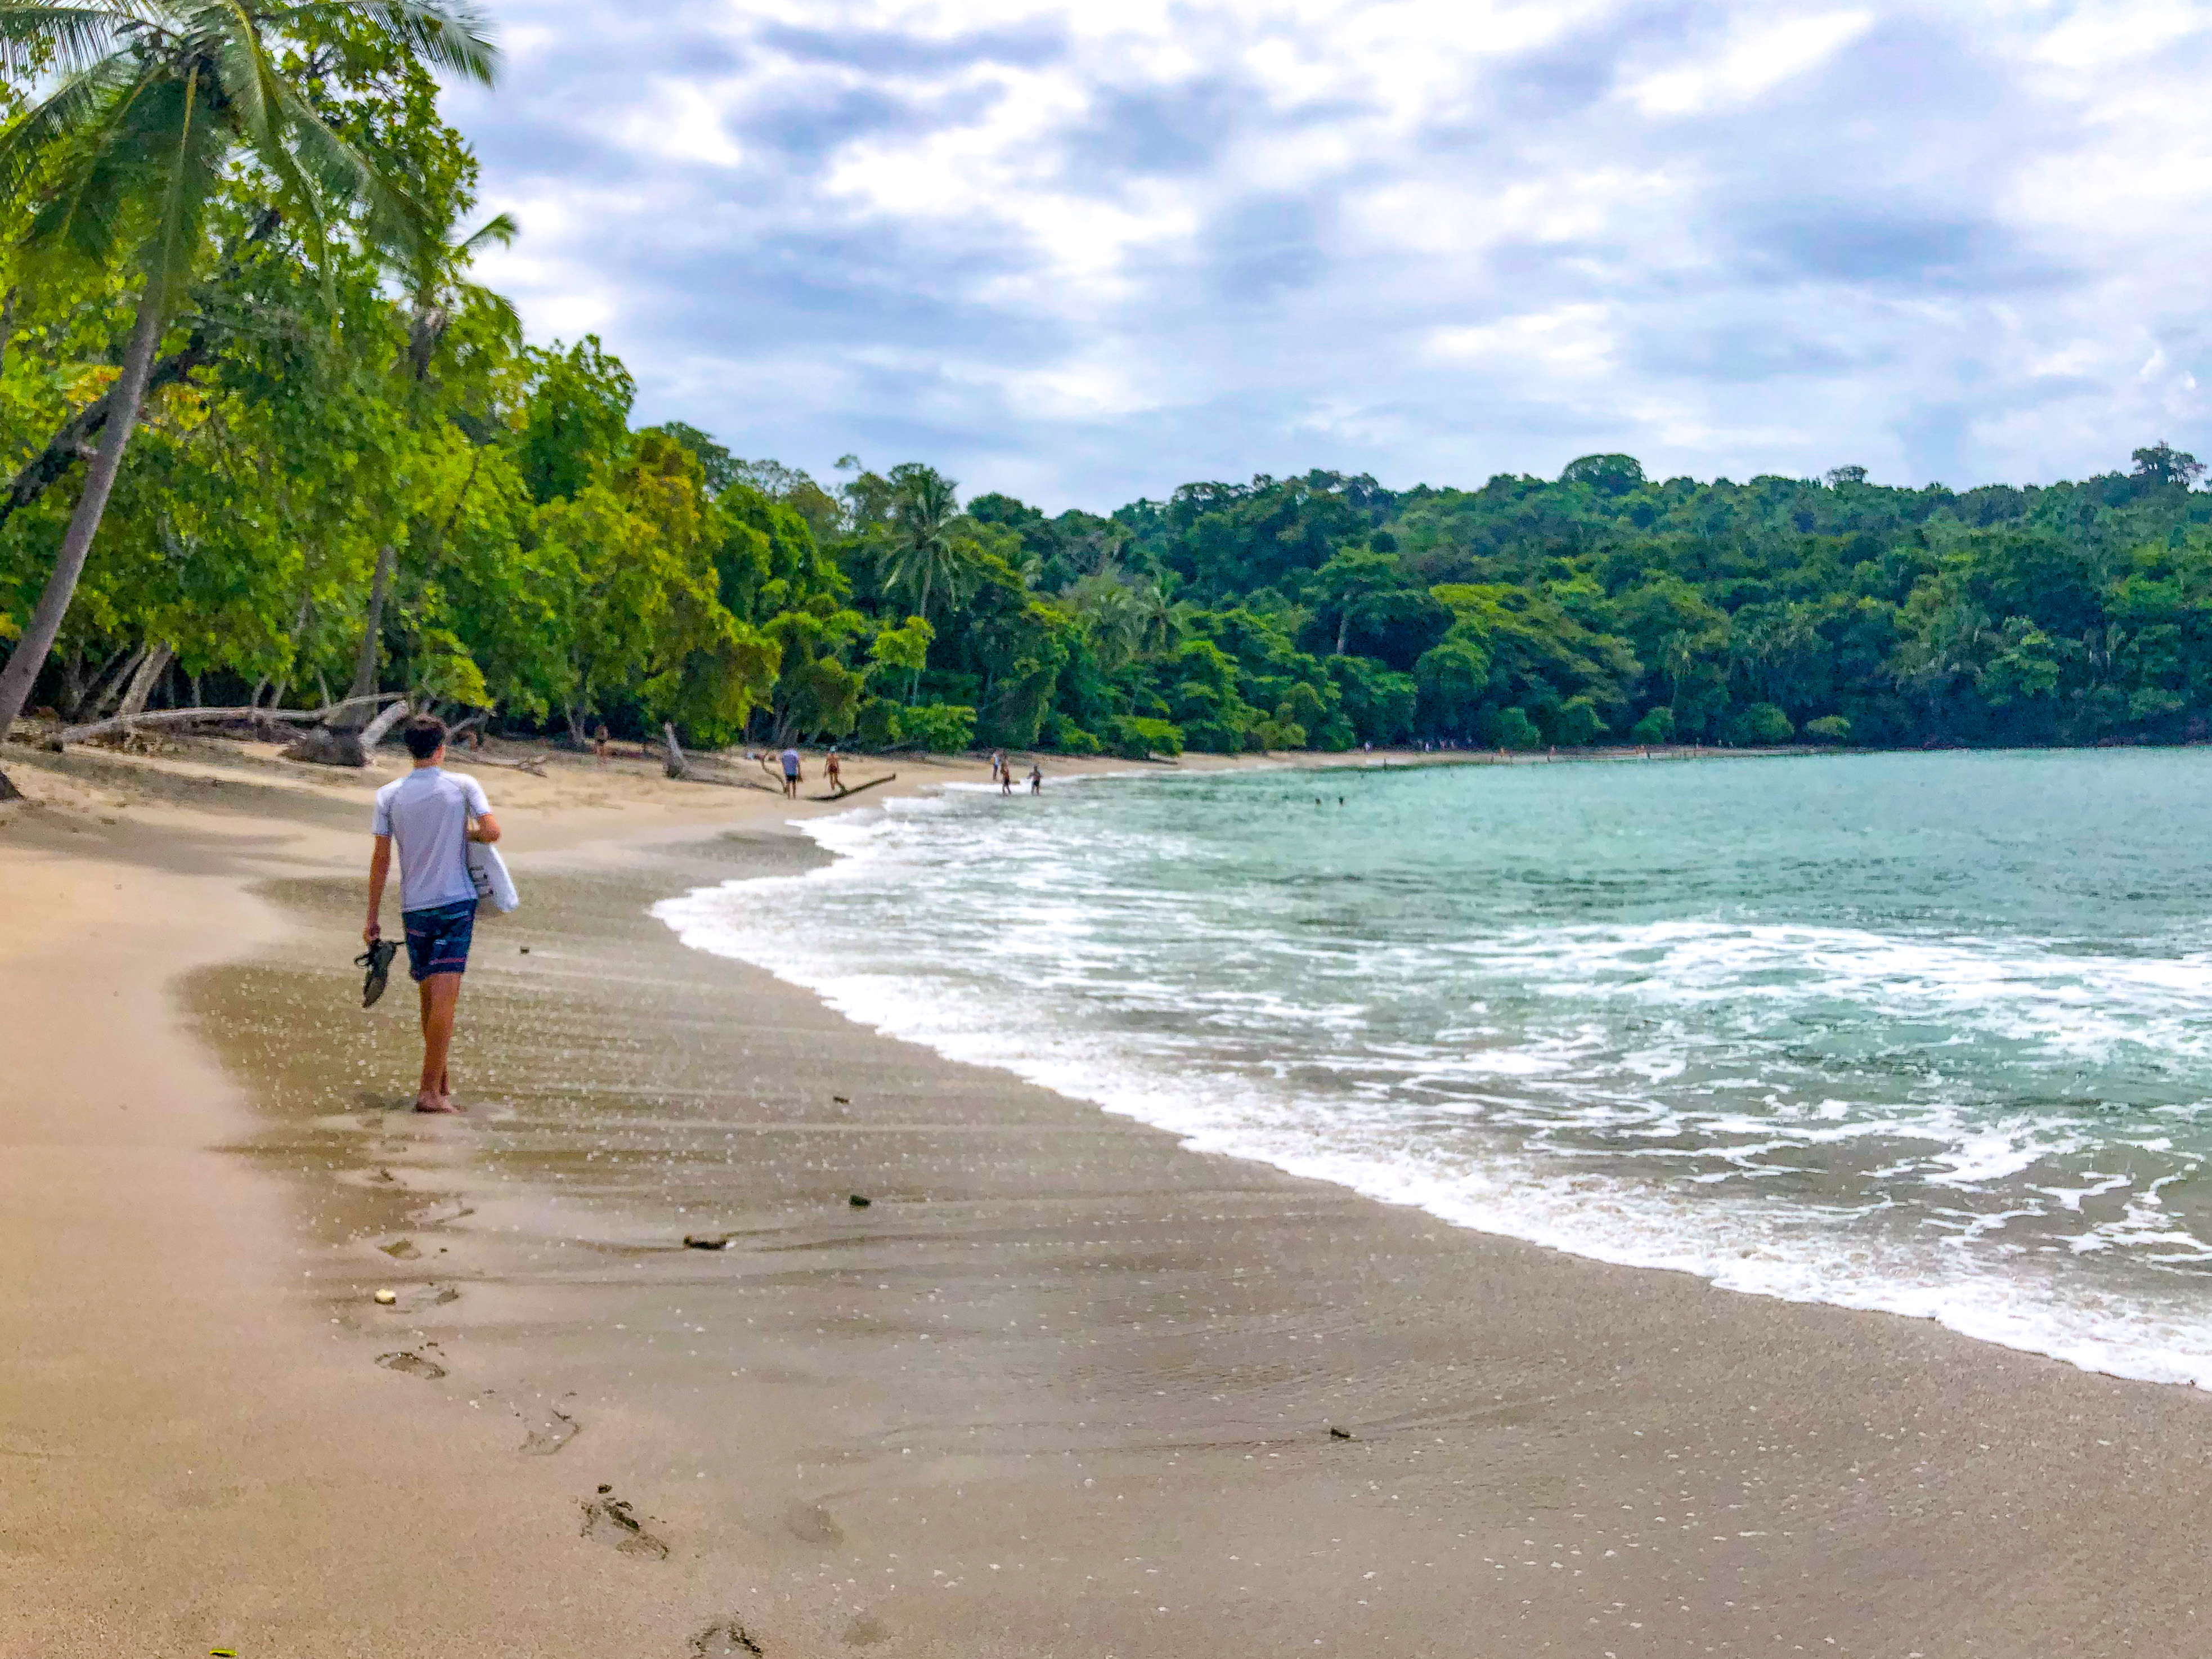 Manuel Antonio Beach is very swimmable and has some good snorkeling on one end